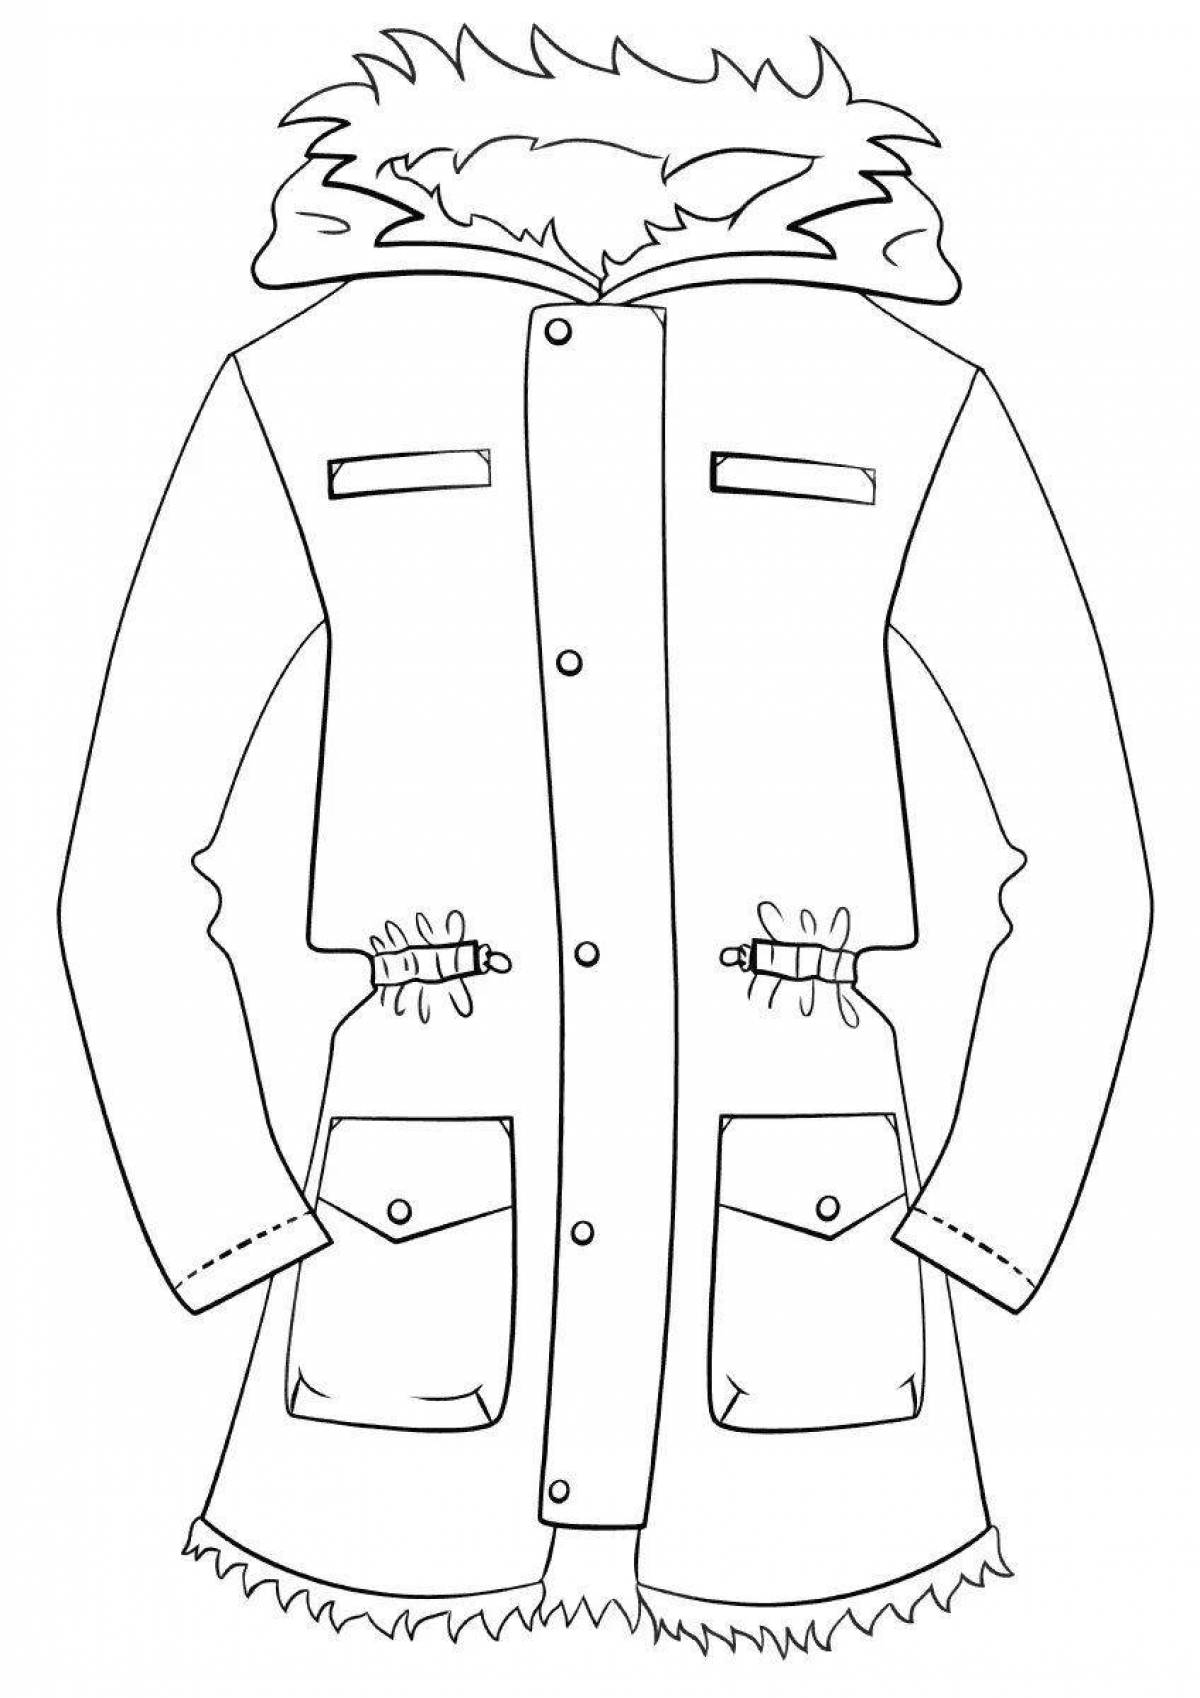 Coloring page stylish jacket for children 3-4 years old